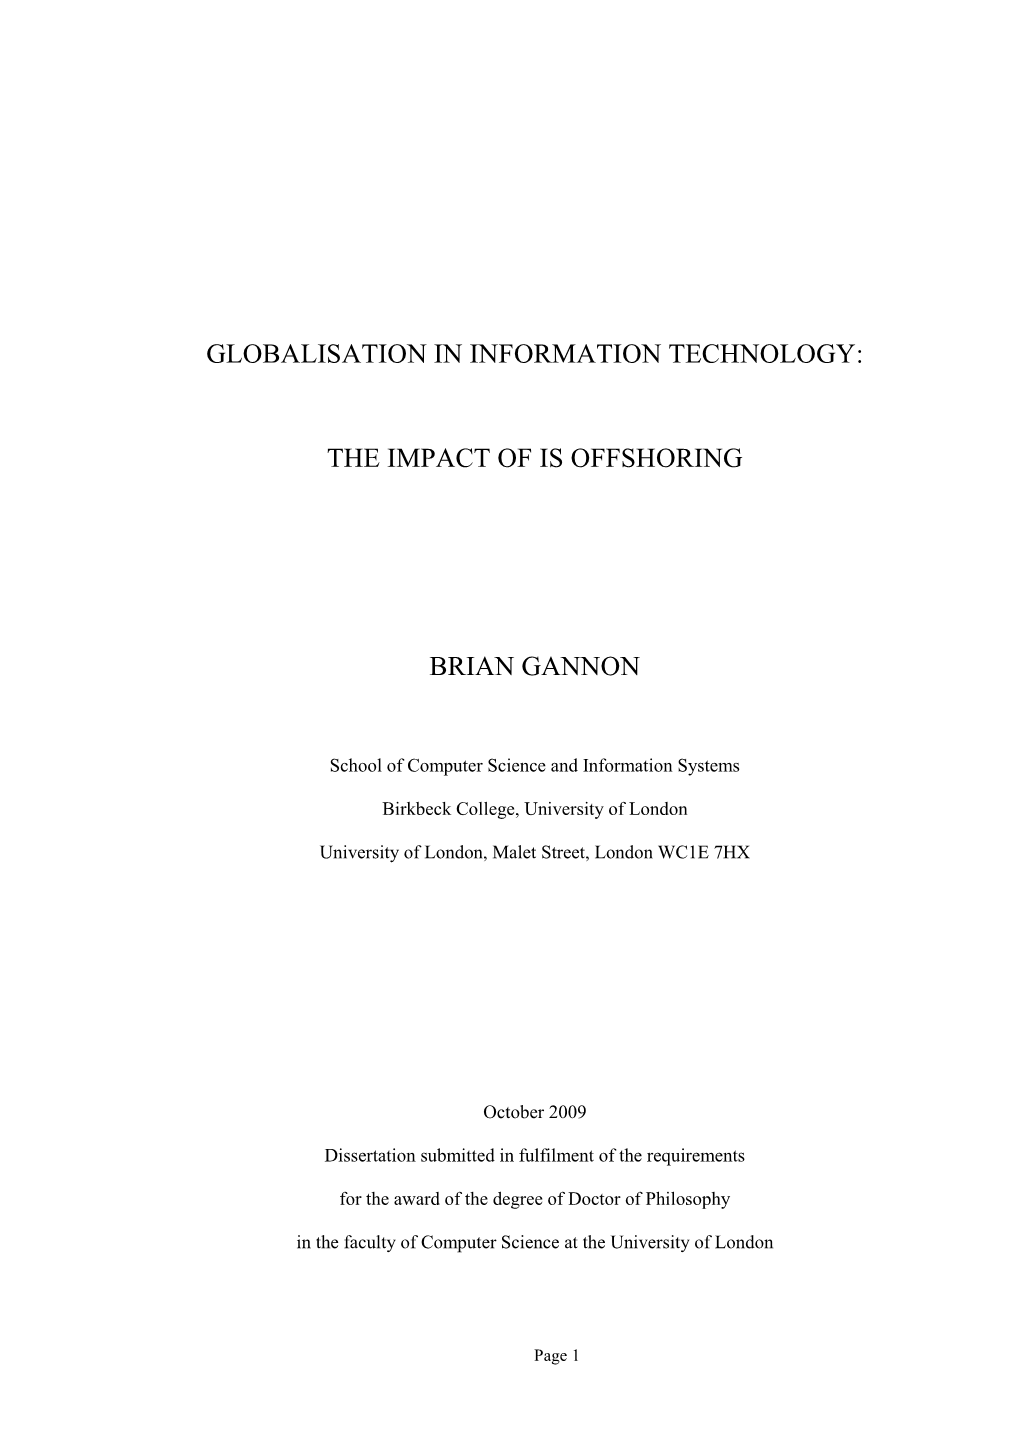 Globalisation in Information Systems: the Impact of IS Offshoring